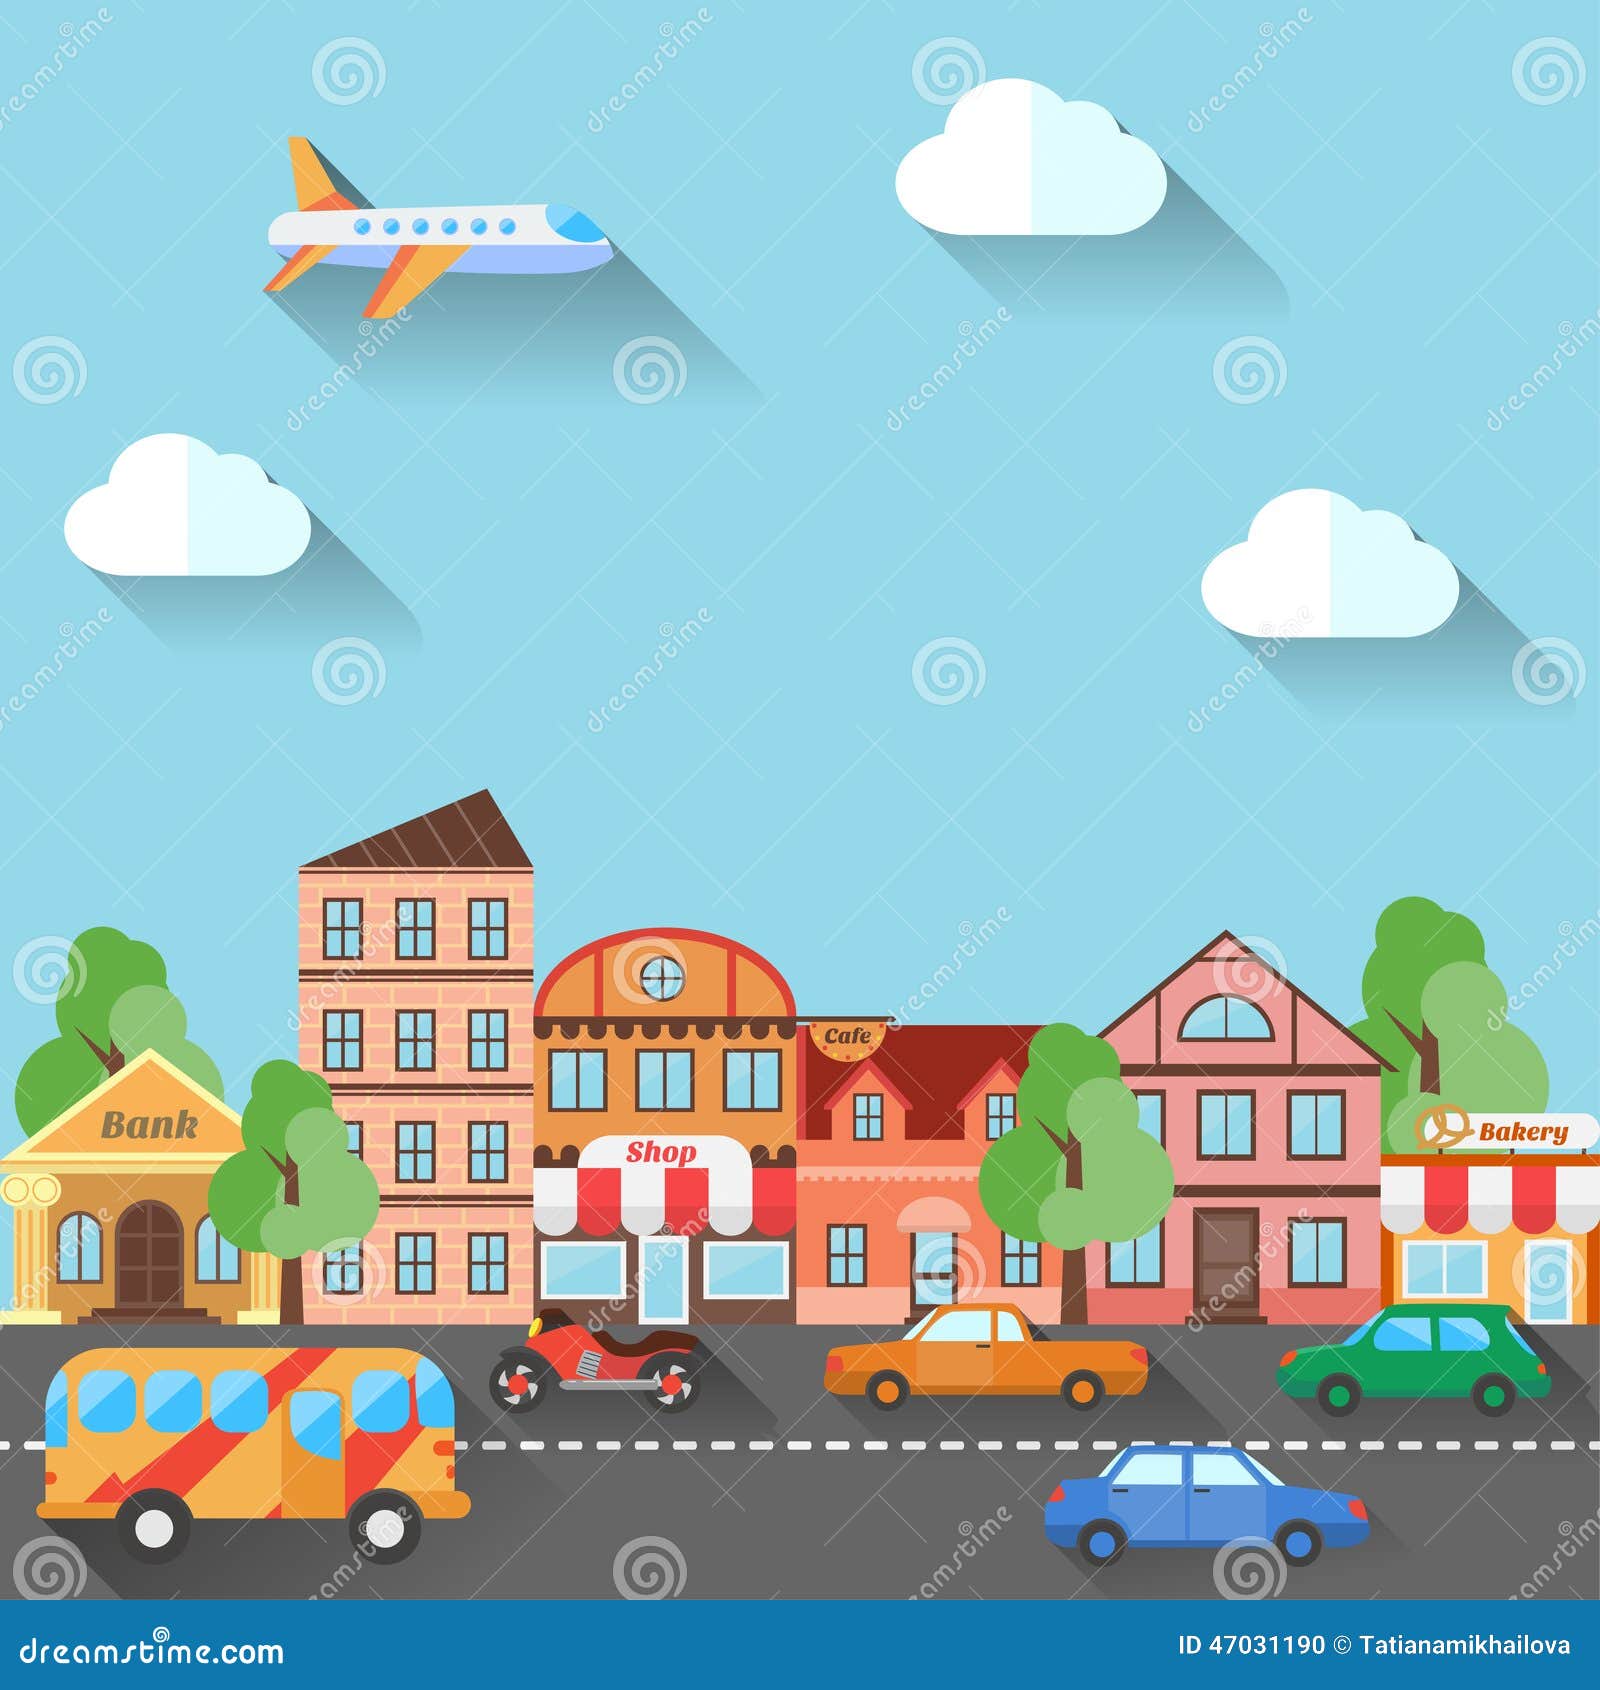 Illustration Of A Town Street, Made In Flat Design Stock 